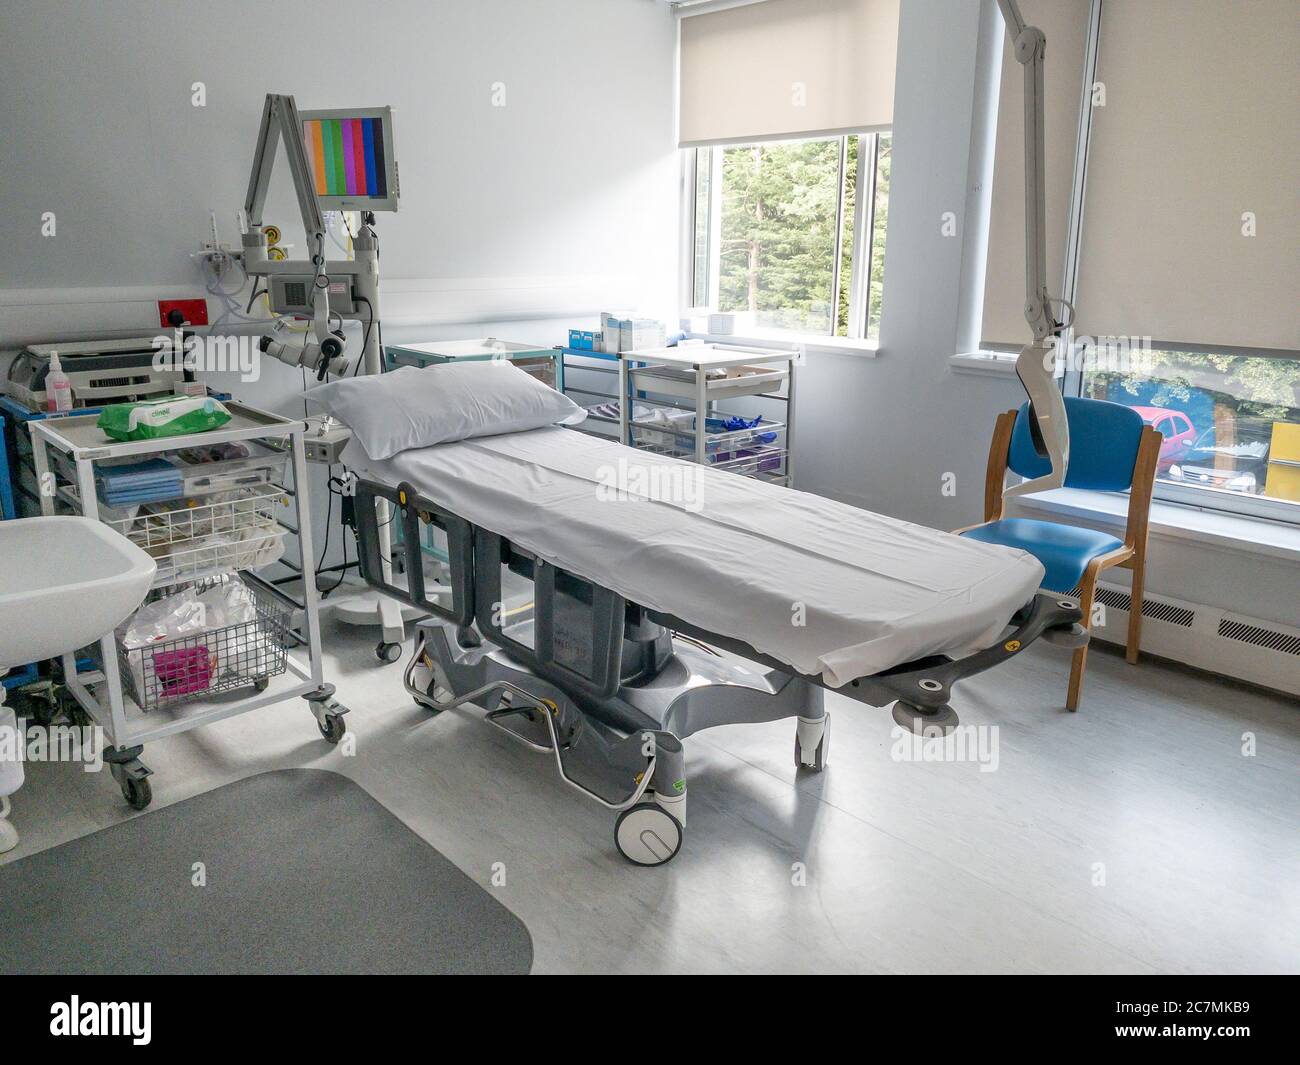 Stretcher in assessment and treatment room of hospital Stock Photo